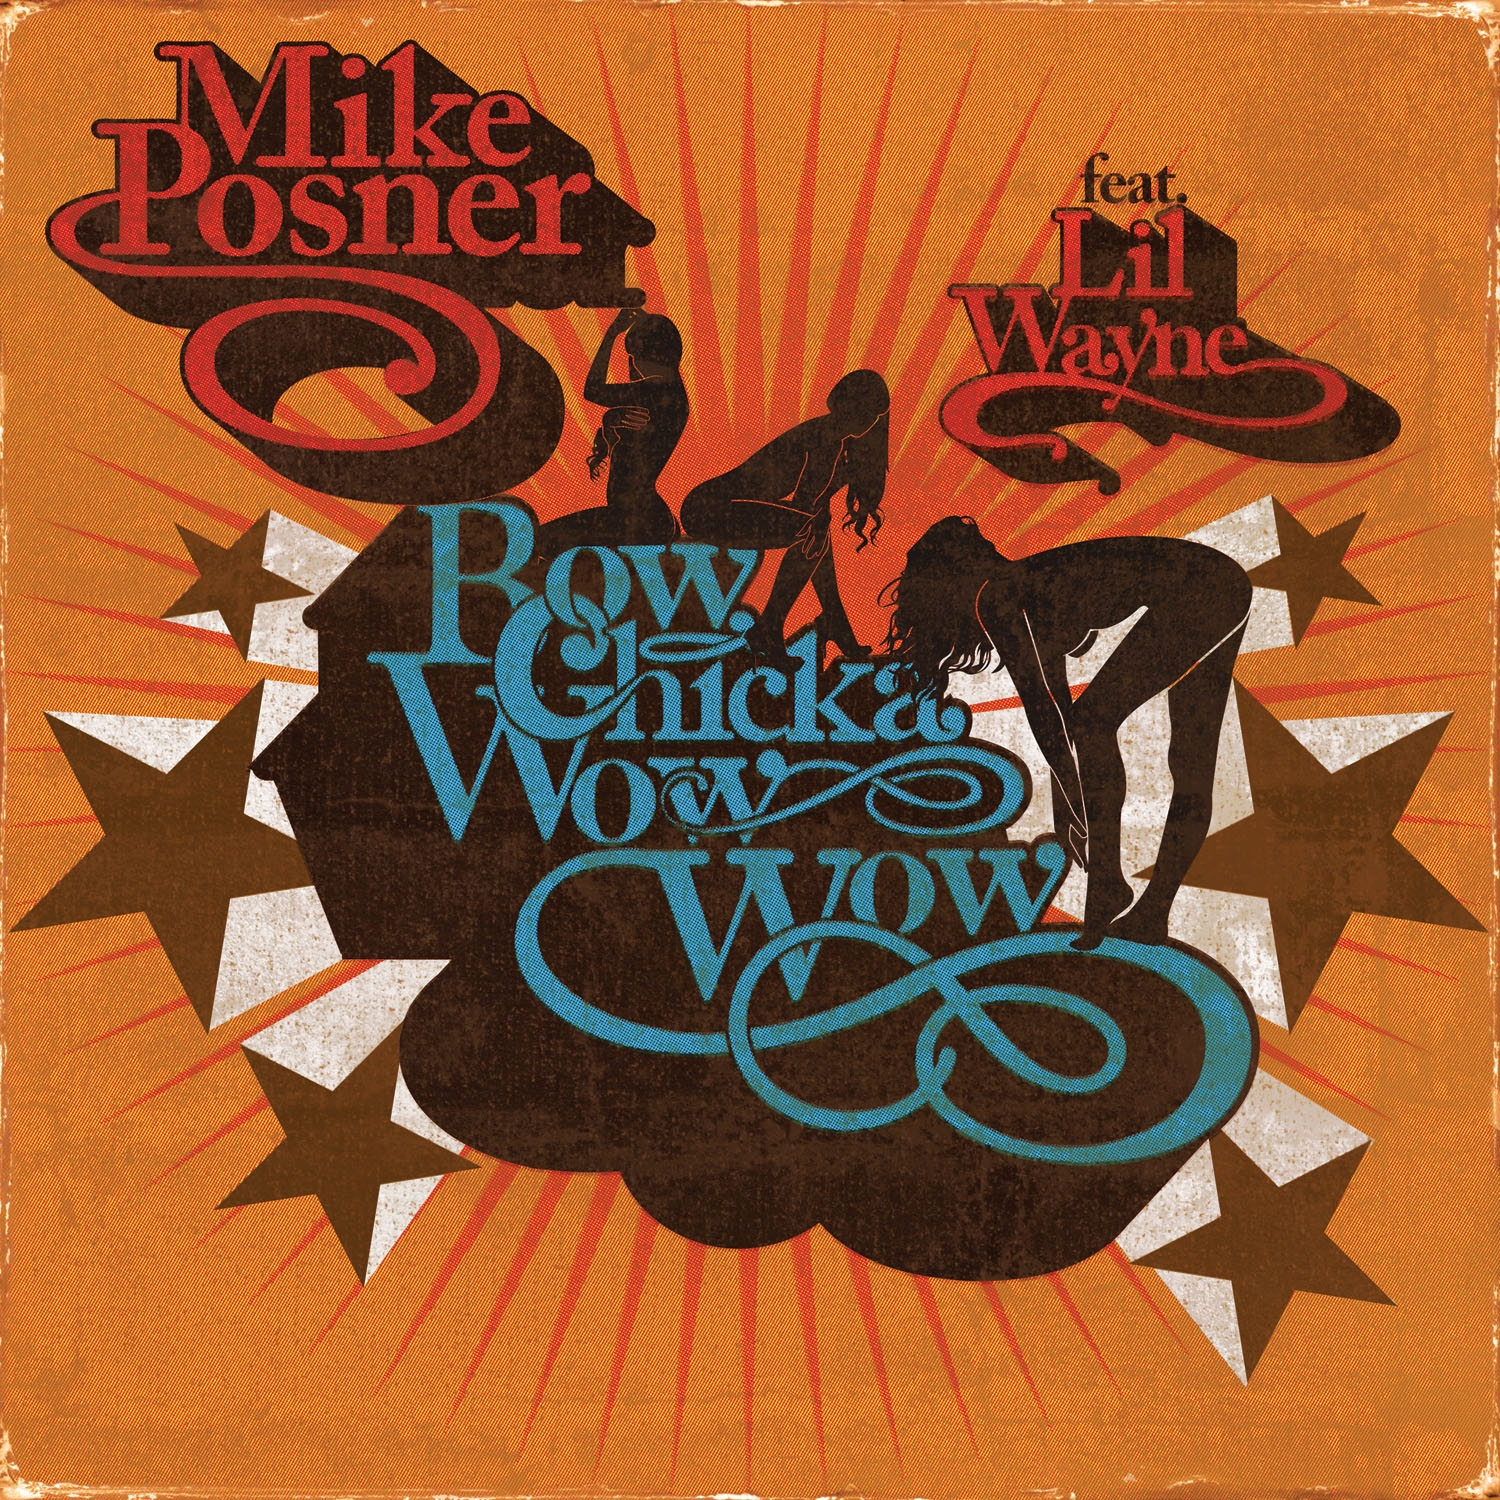 Mike Posner - Bow Chicka Wow Wow (feat. Lil Wayne)
